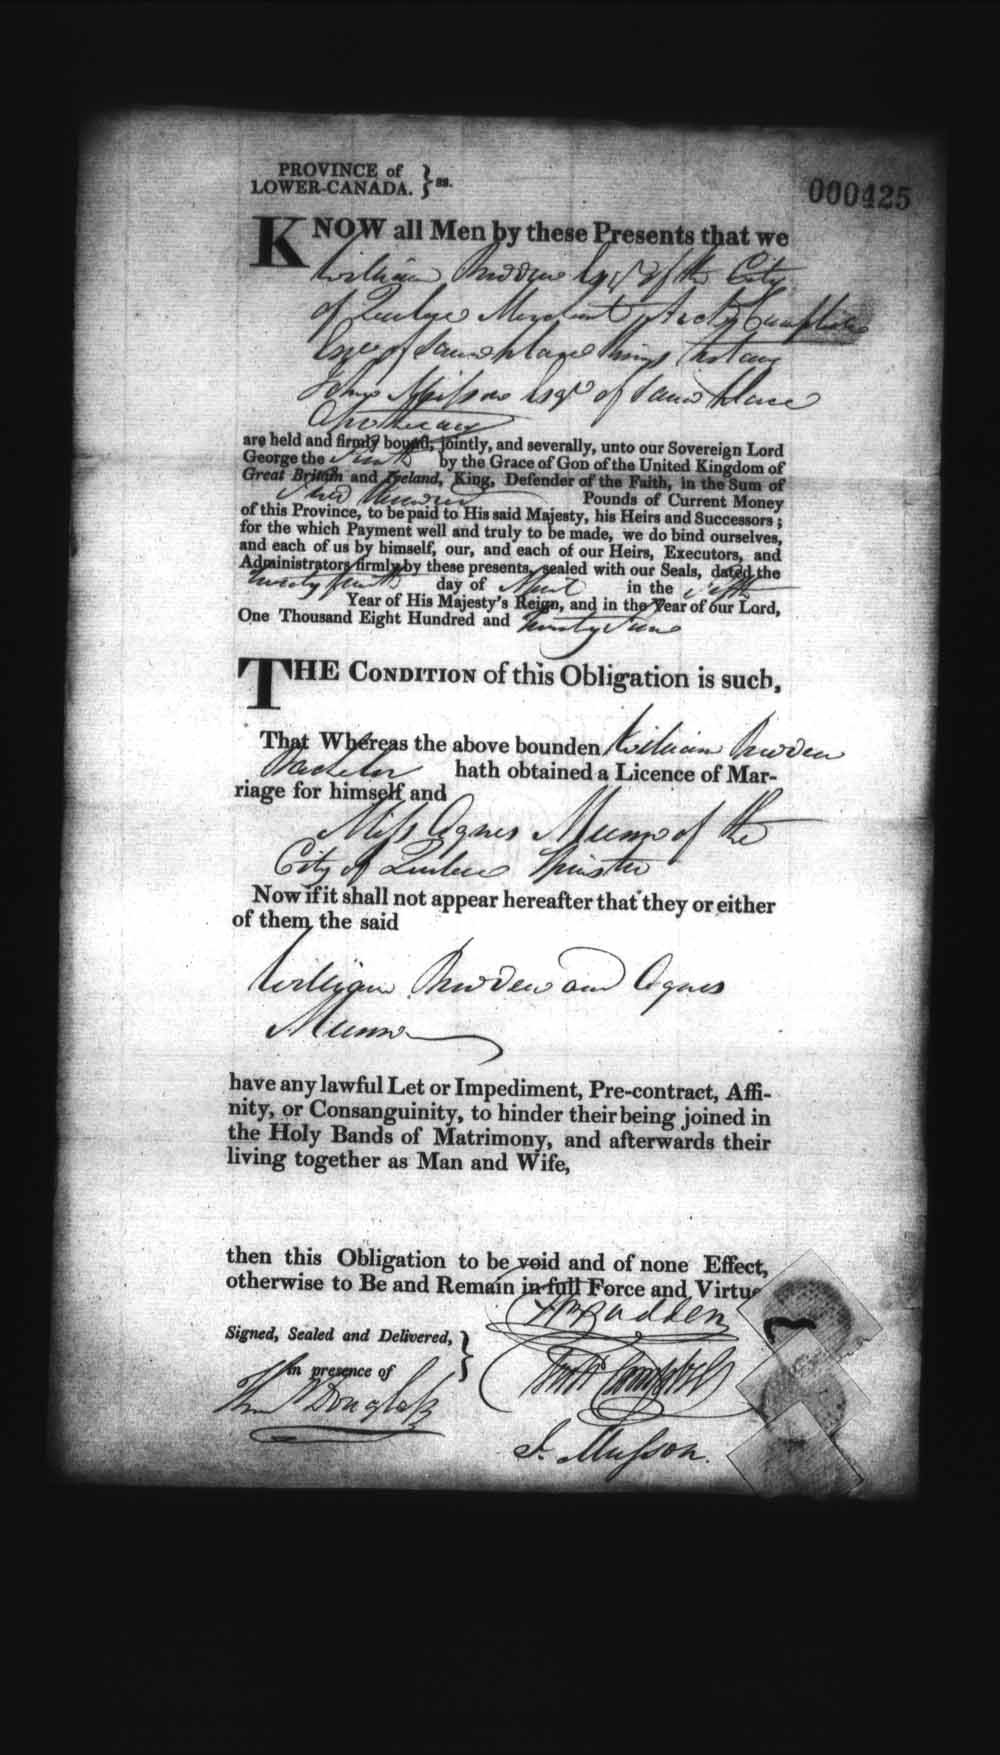 Digitized page of Upper and Lower Canada Marriage Bonds (1779-1865) for Image No.: e008236329